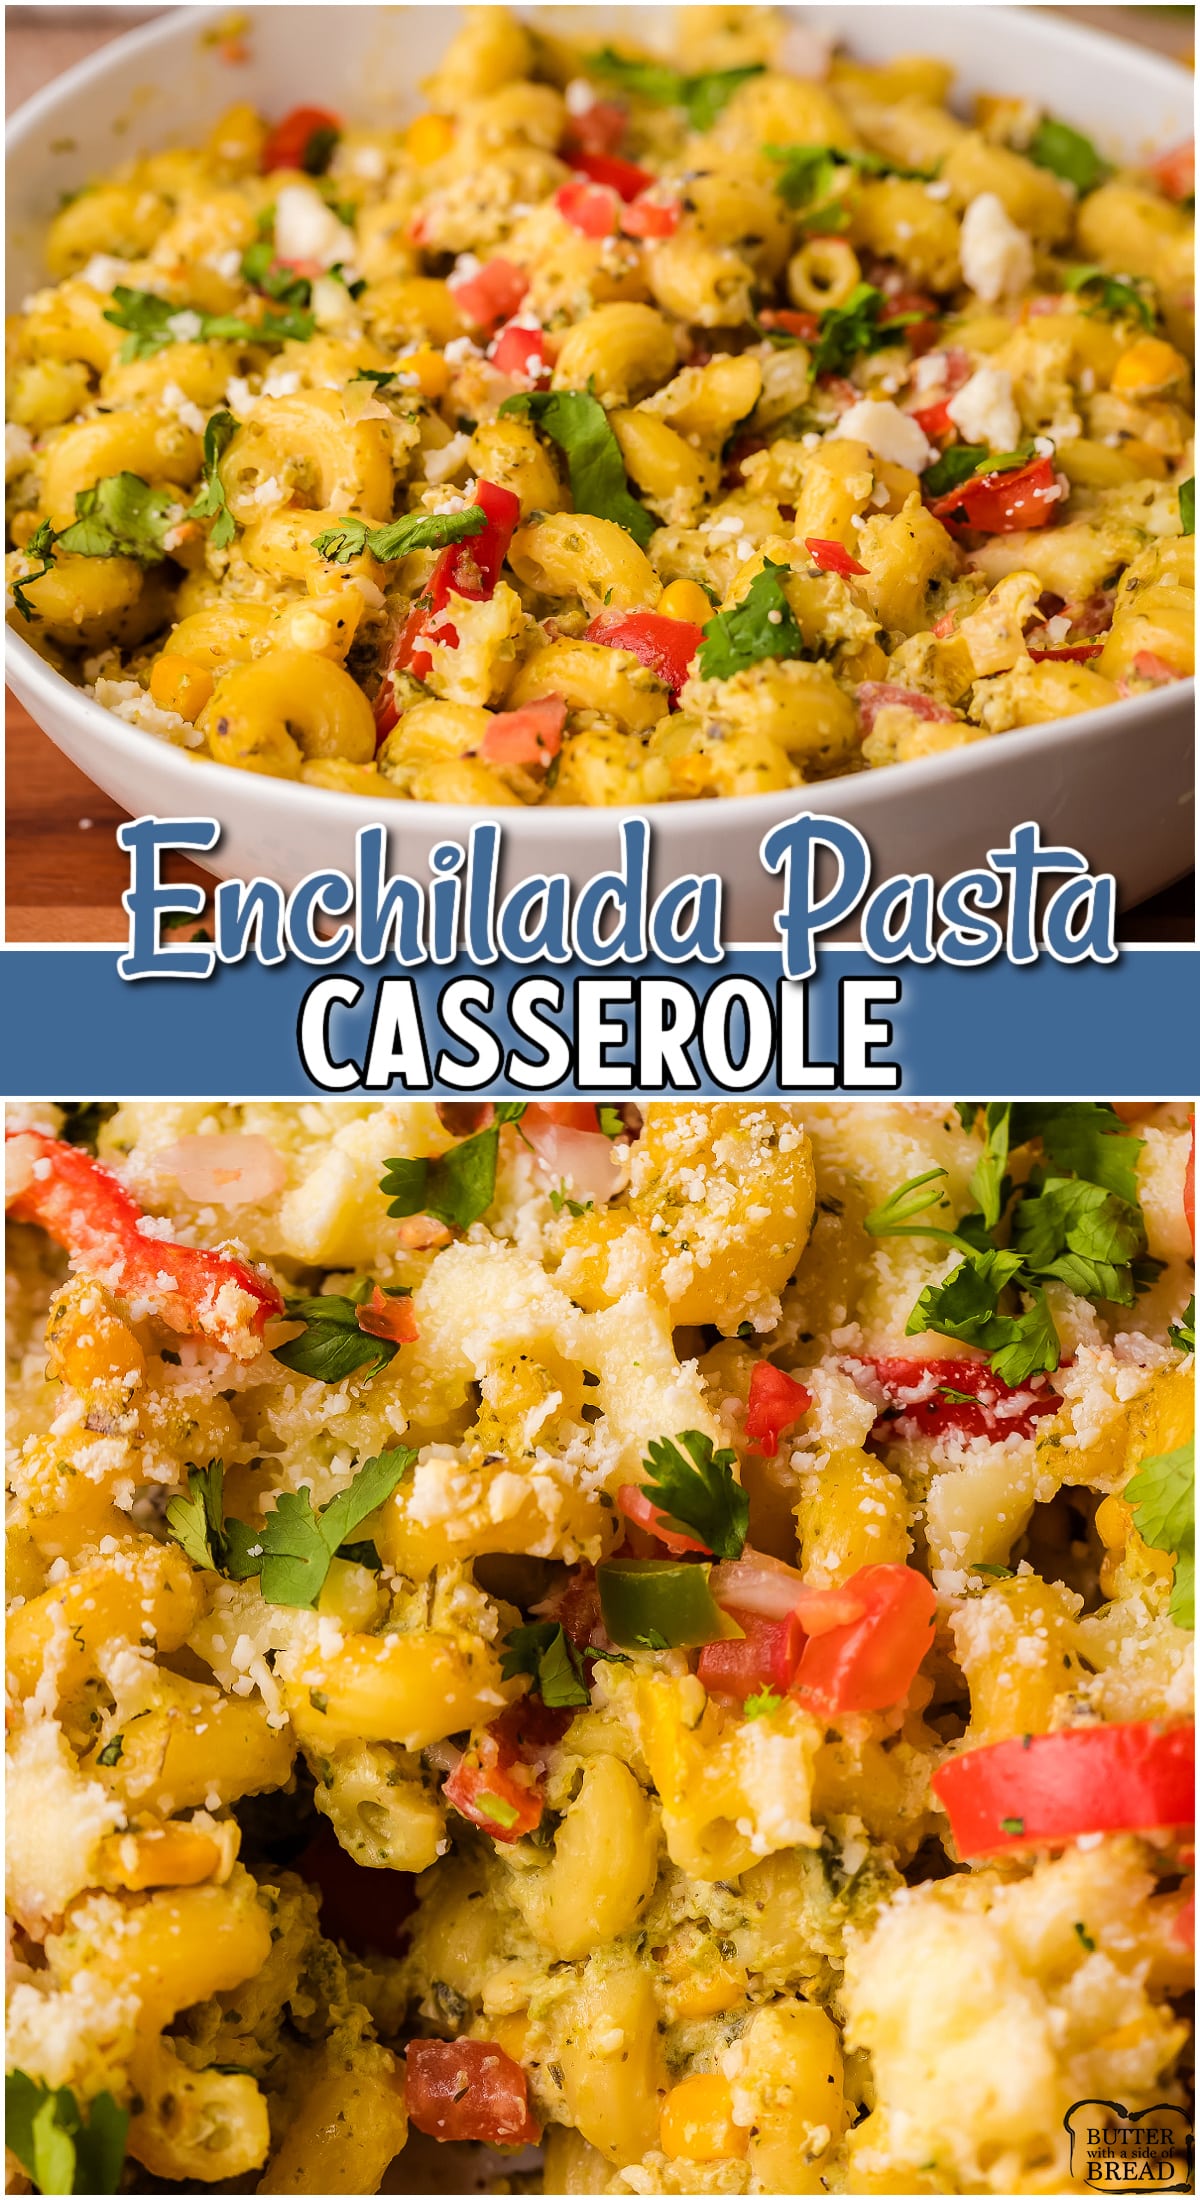 Enchilada Pasta Casserole made with pasta, peppers, corn & Pico de Gallo, topped with an incredible creamy cilantro lime sauce & baked with cheese! This pasta casserole is an amazing twist on classic enchiladas! 